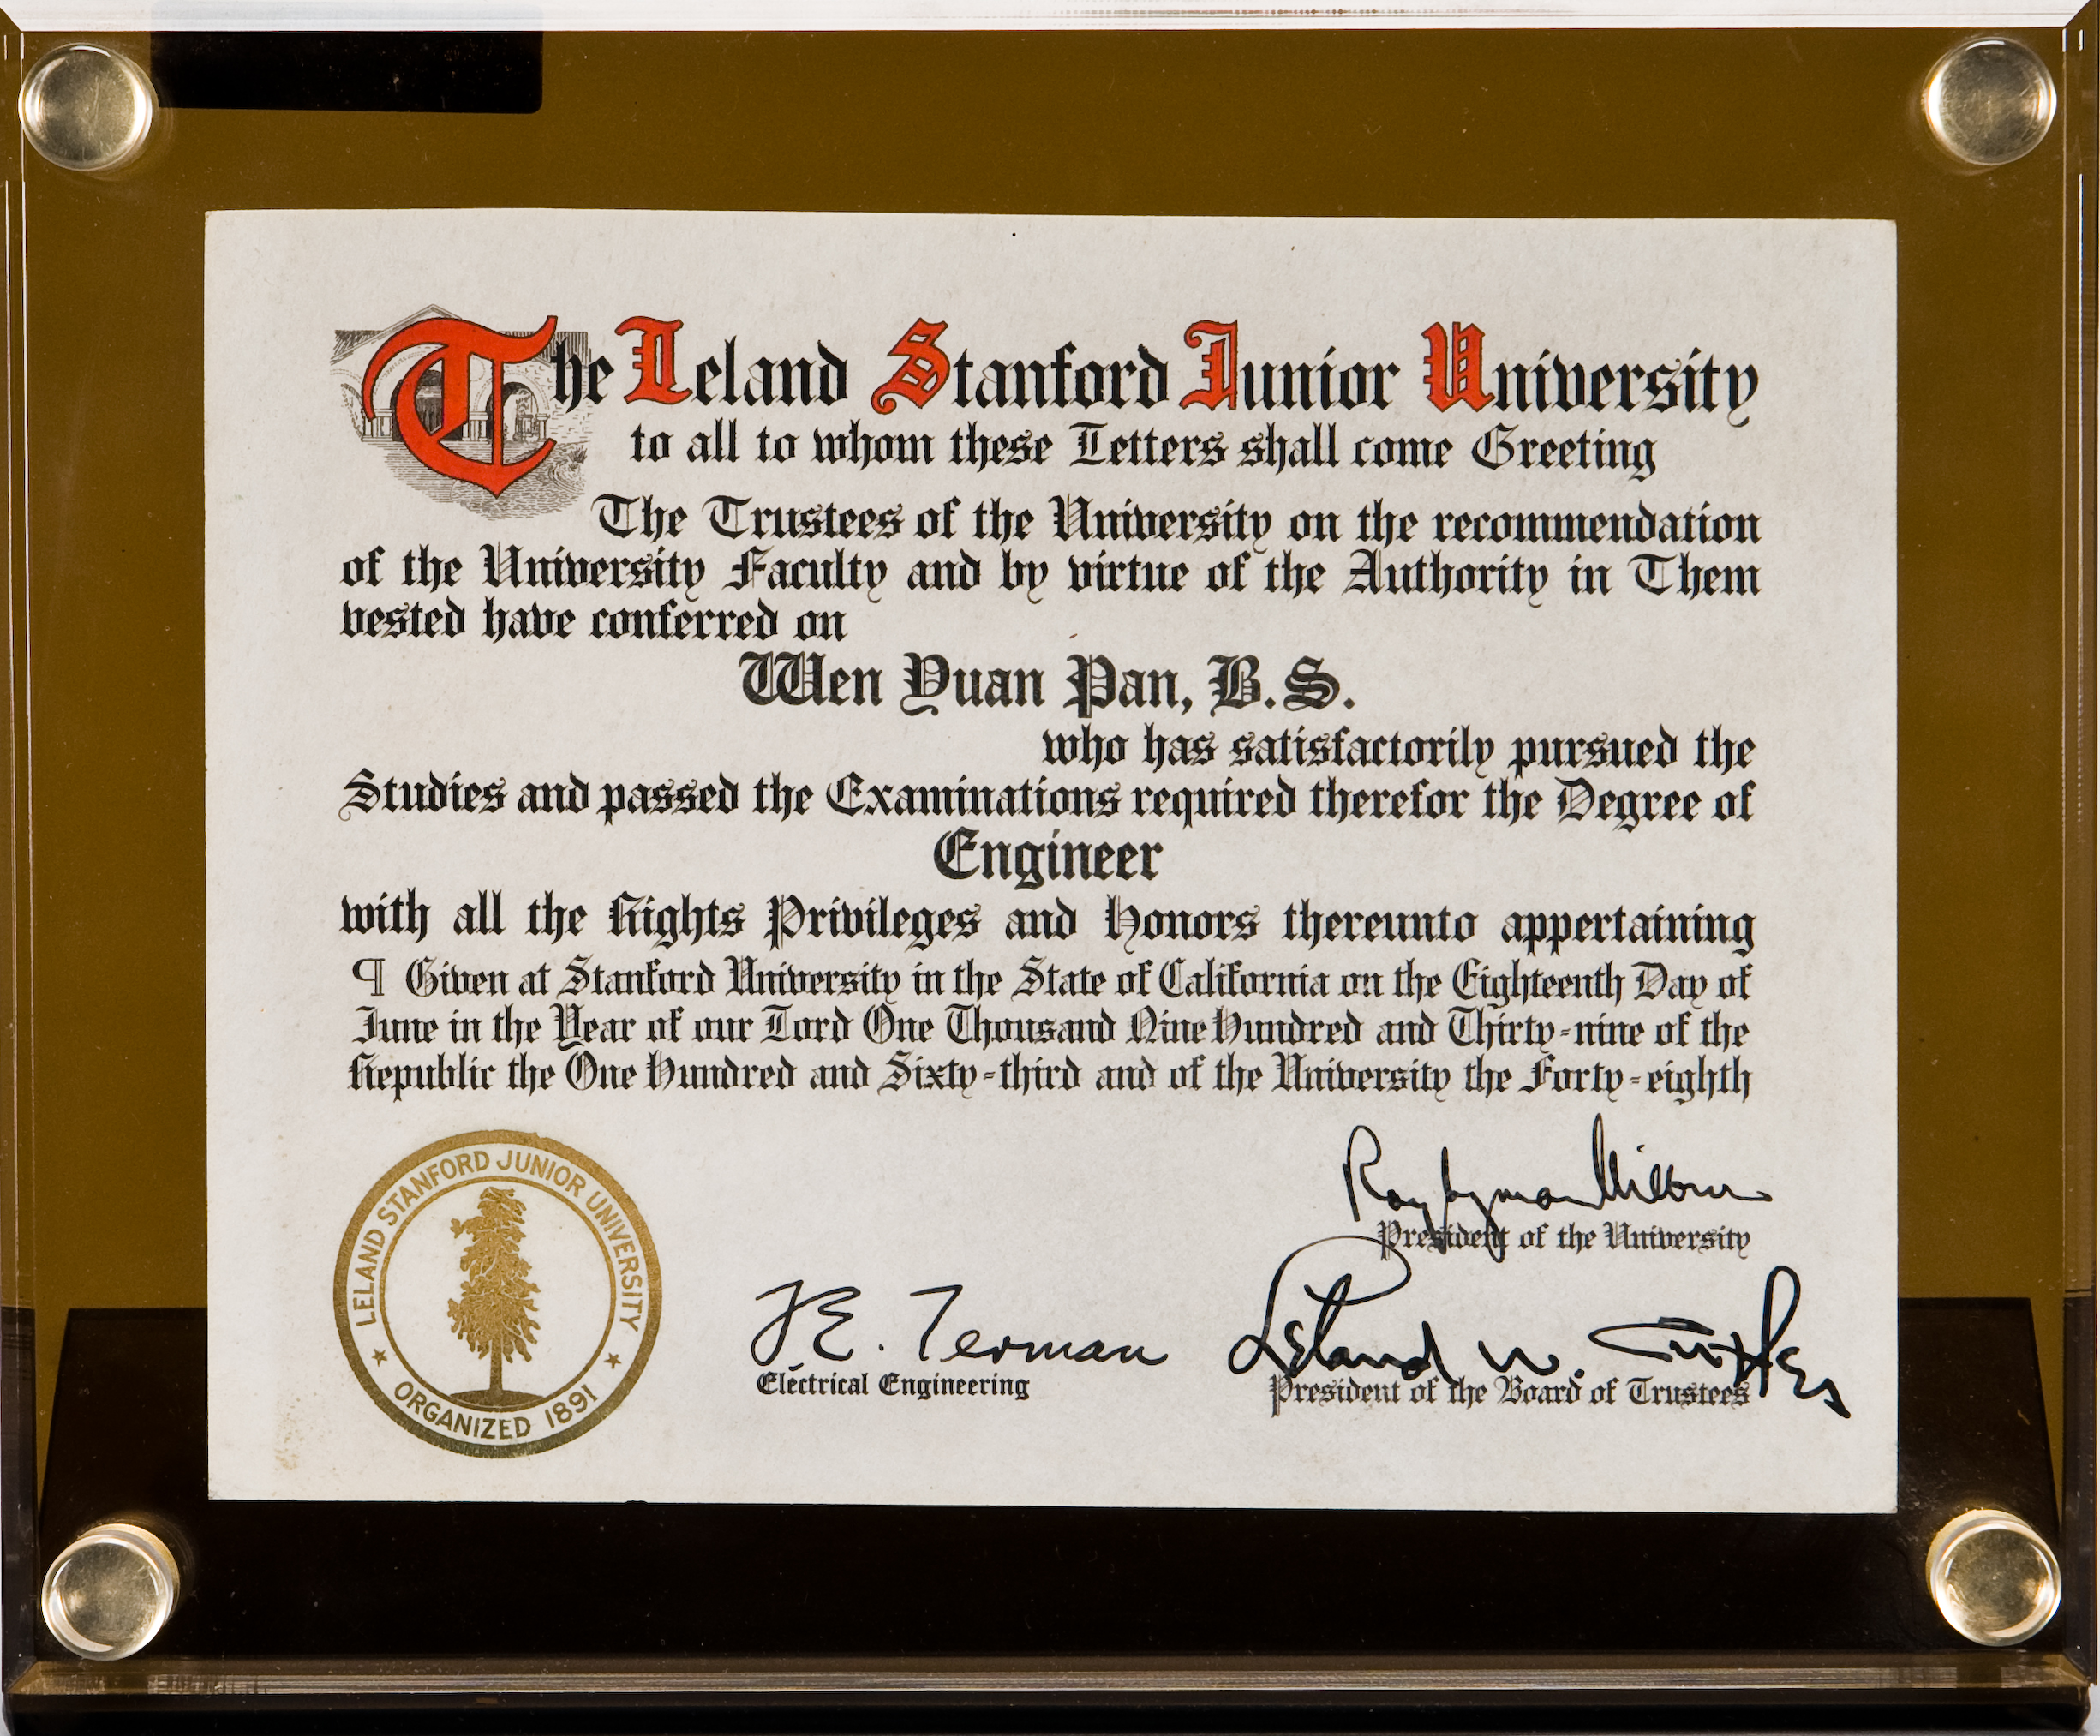 Certificate of the bachelor's degree in electrical engineering from Stanford Univeristy.